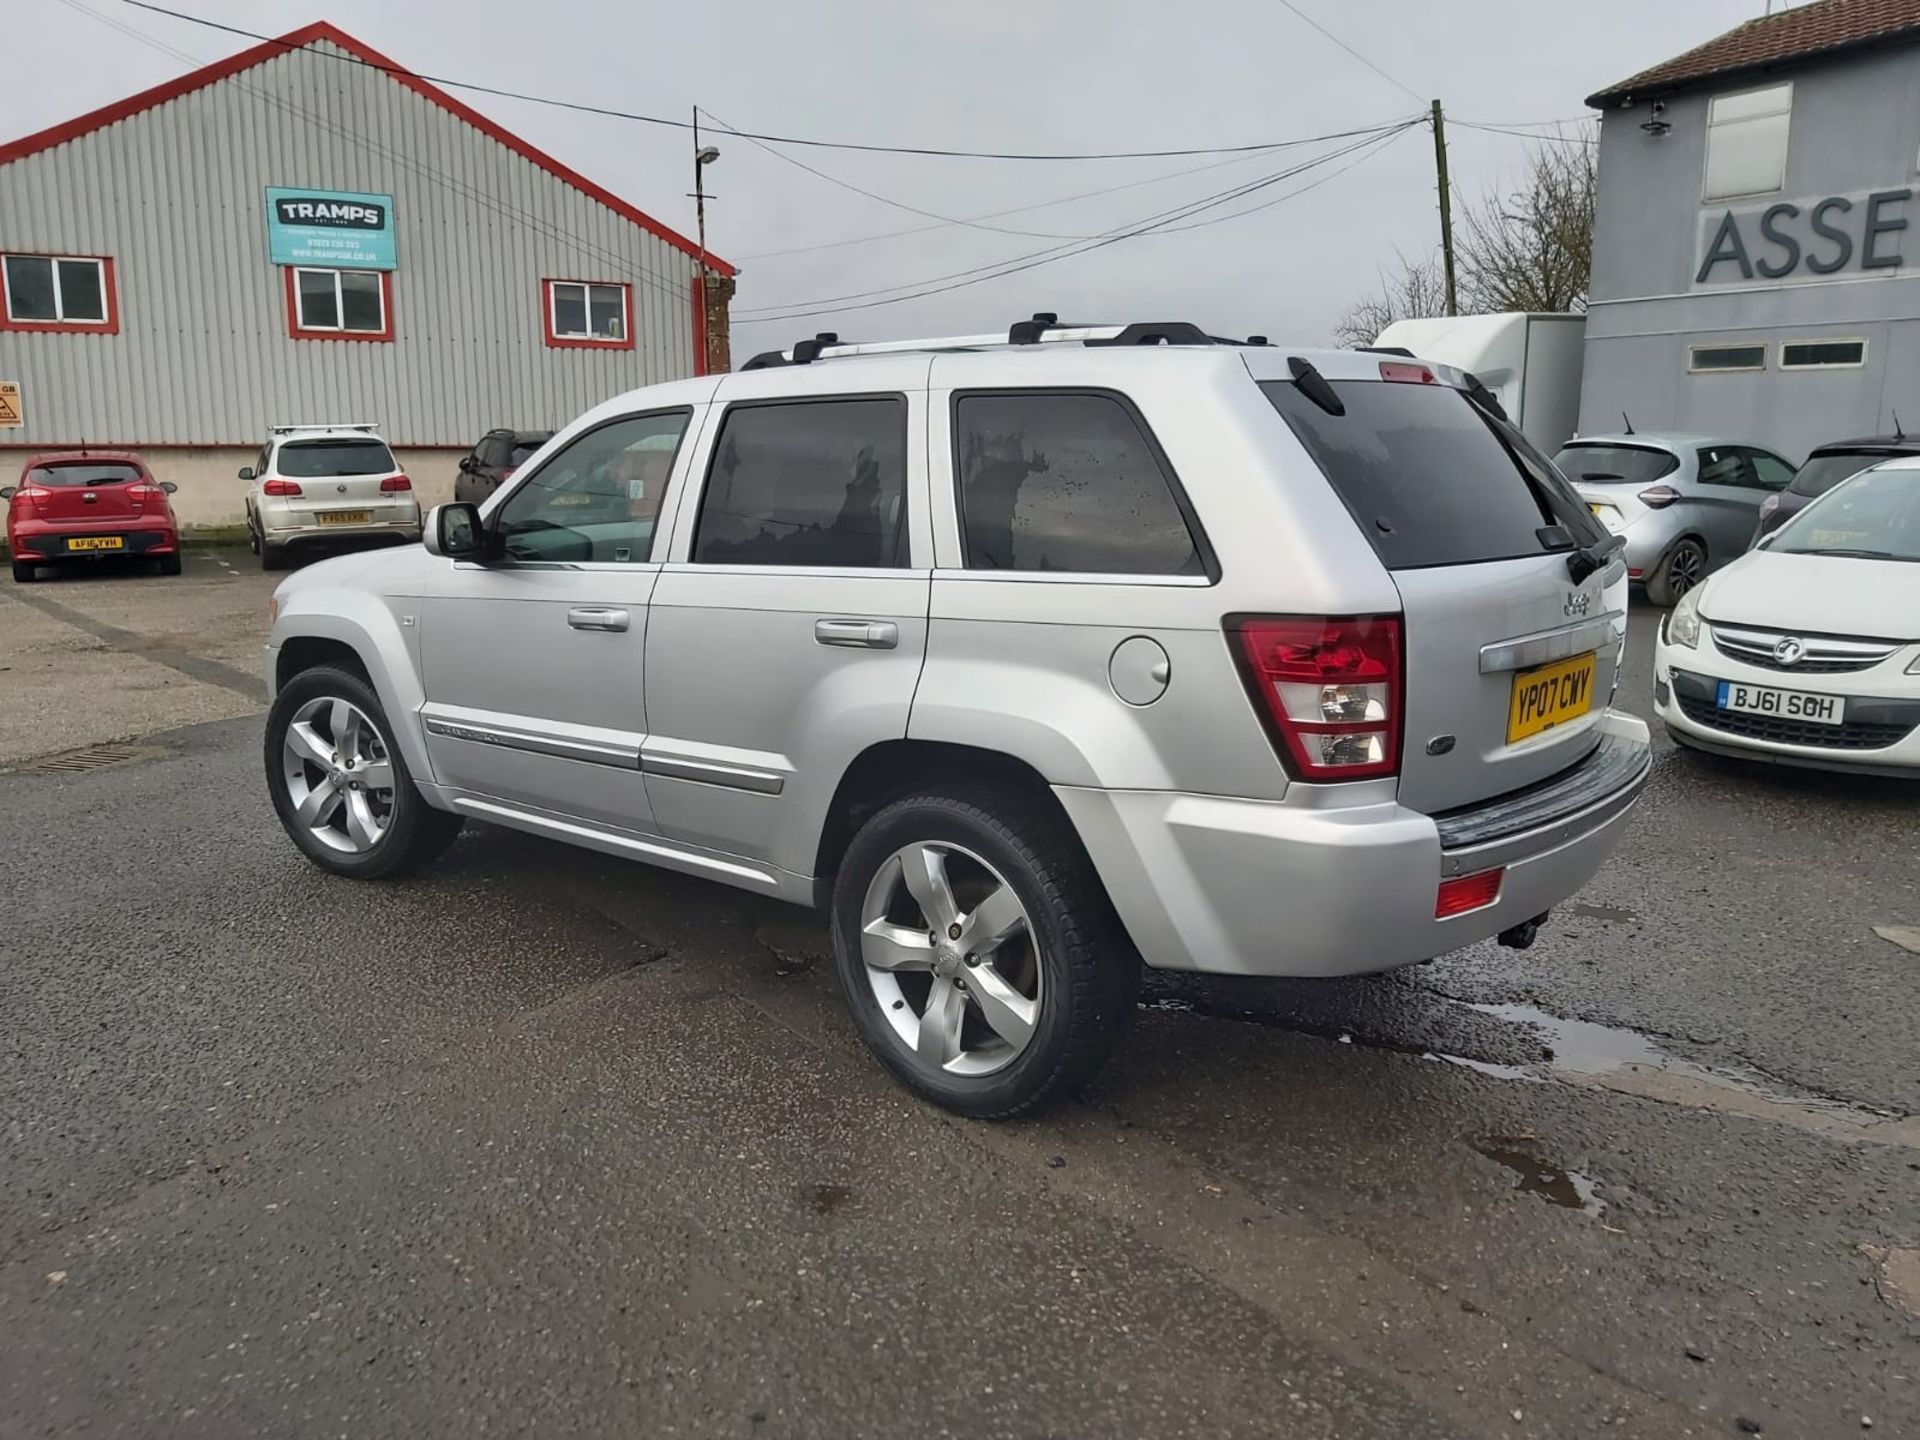 NO RESERVE 2007 JEEP G-CHEROKEE OVERLAND CRD A SILVER SUV ESTATE *NO VAT* - Image 5 of 17